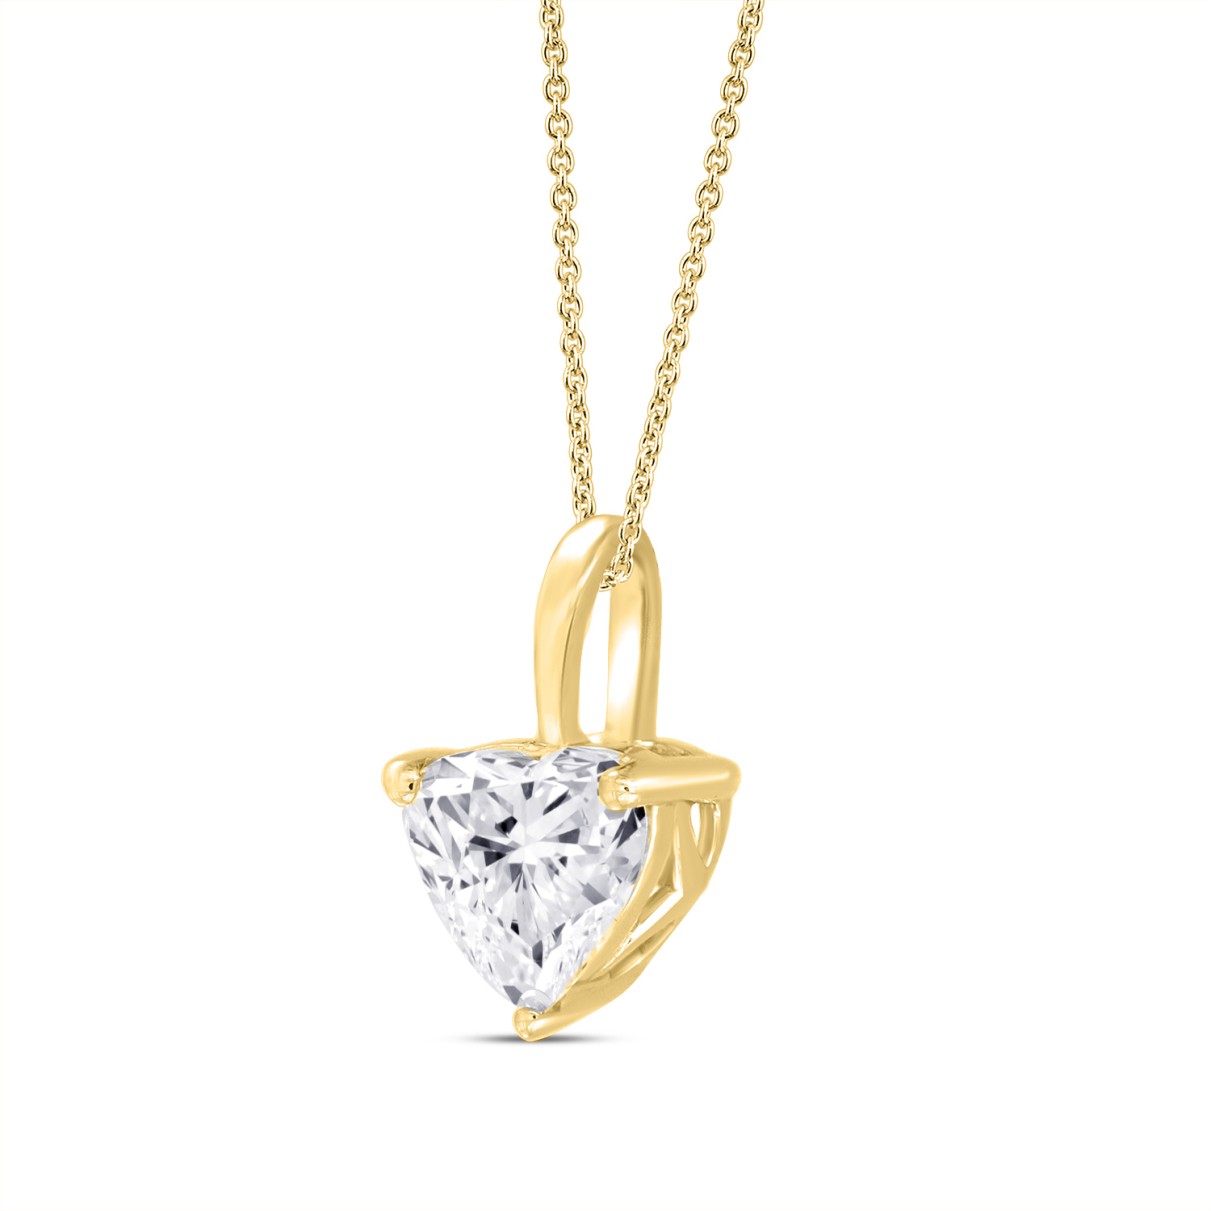 LADIES SOLITAIRE PENDANT WITH CHAIN 3CT HEART DIAMOND 14K YELLOW GOLD 